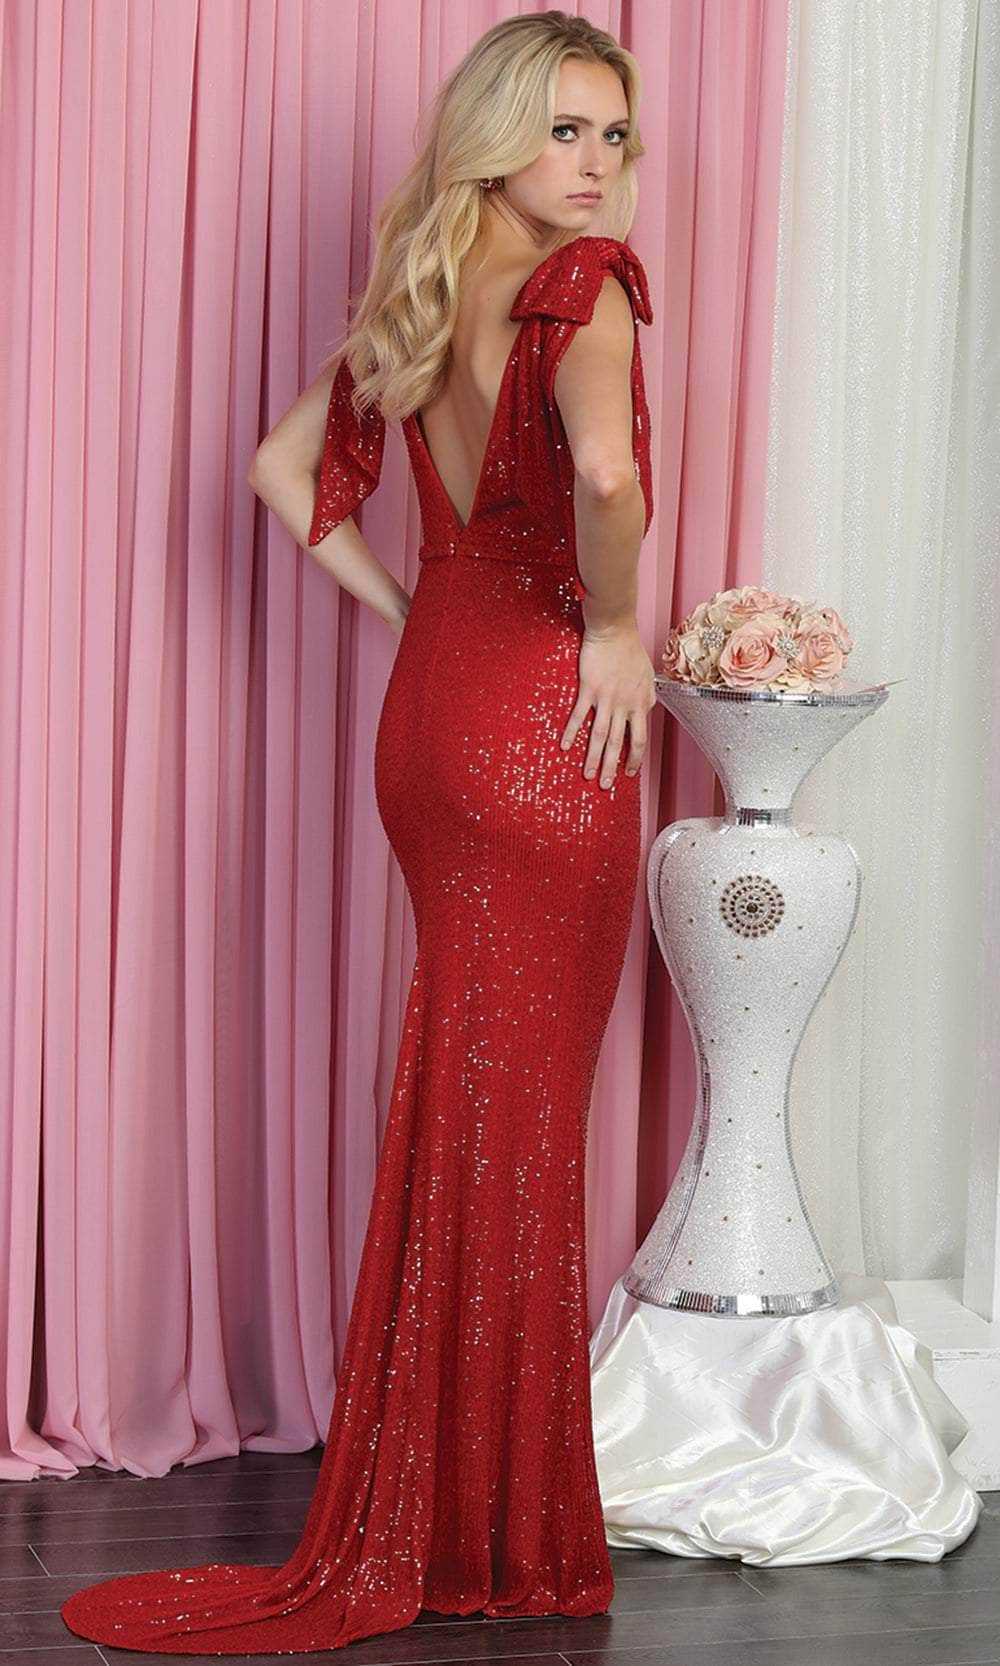 May Queen, May Queen RQ7891 - Fully Sequined Ribbon Straps Evening Gown